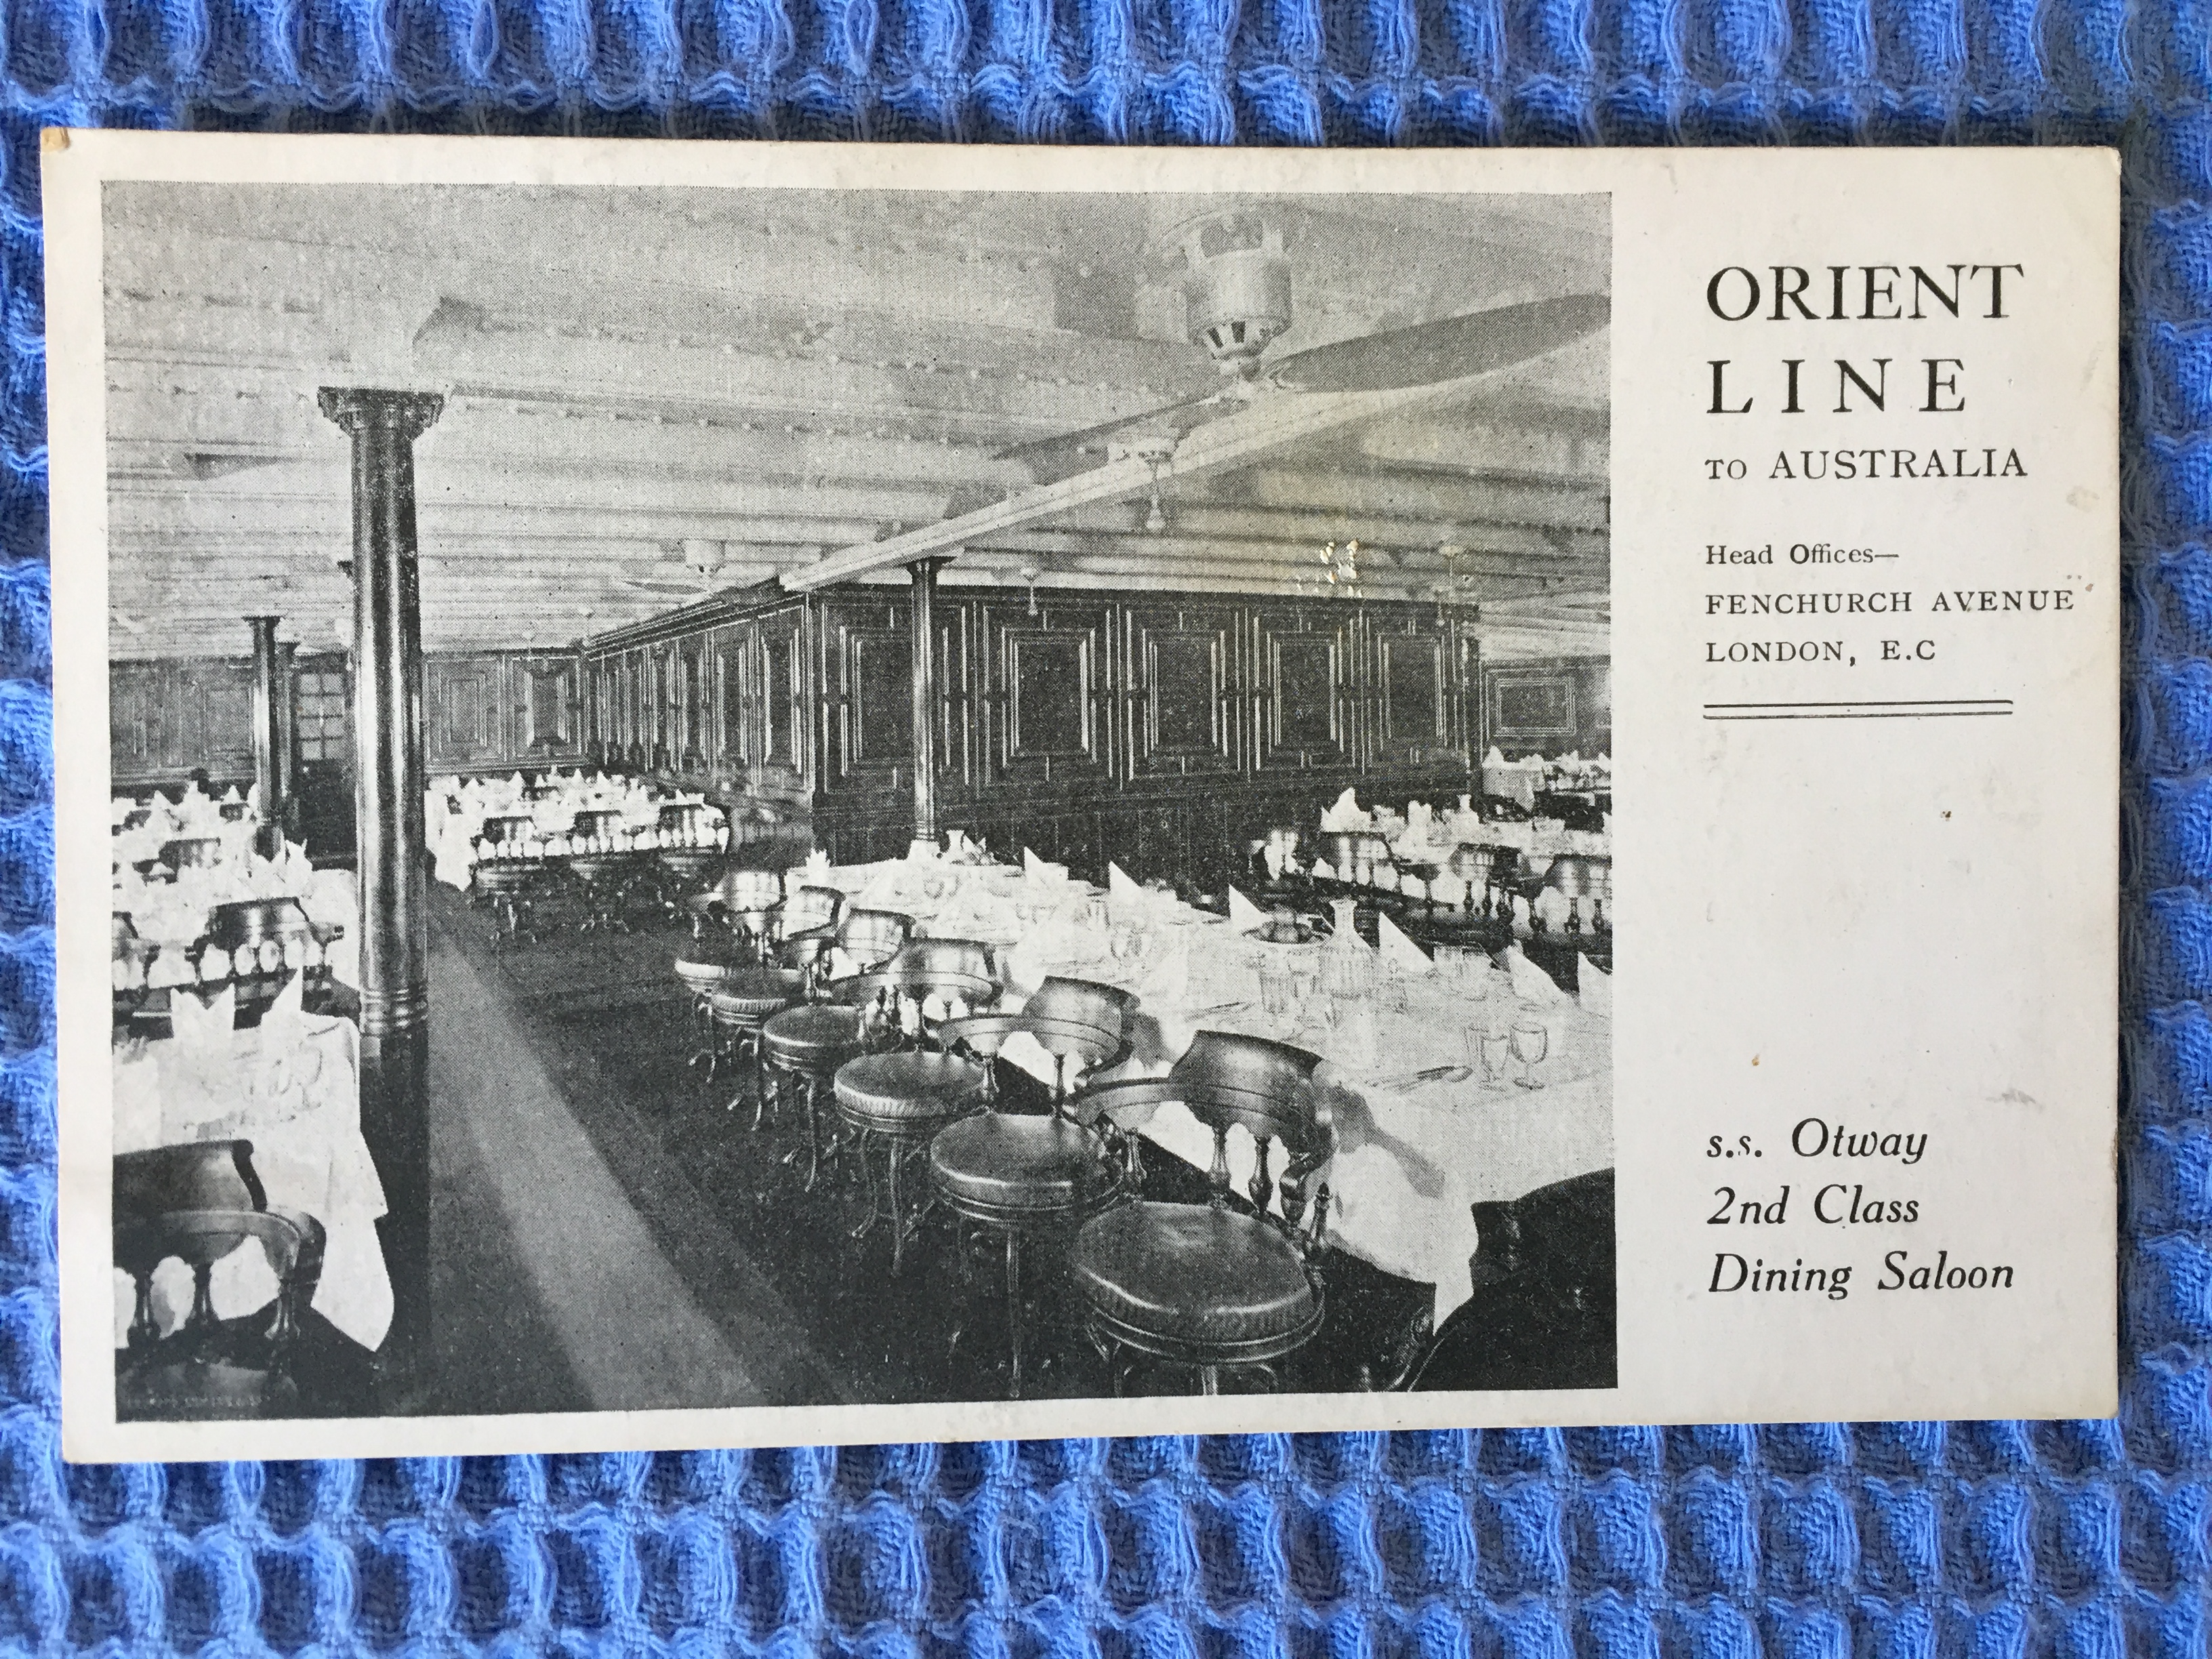 VERY RARE TO FIND EARLY POSTCARD FROM THE ORIENT LINE VESSEL THE SS OTWAY